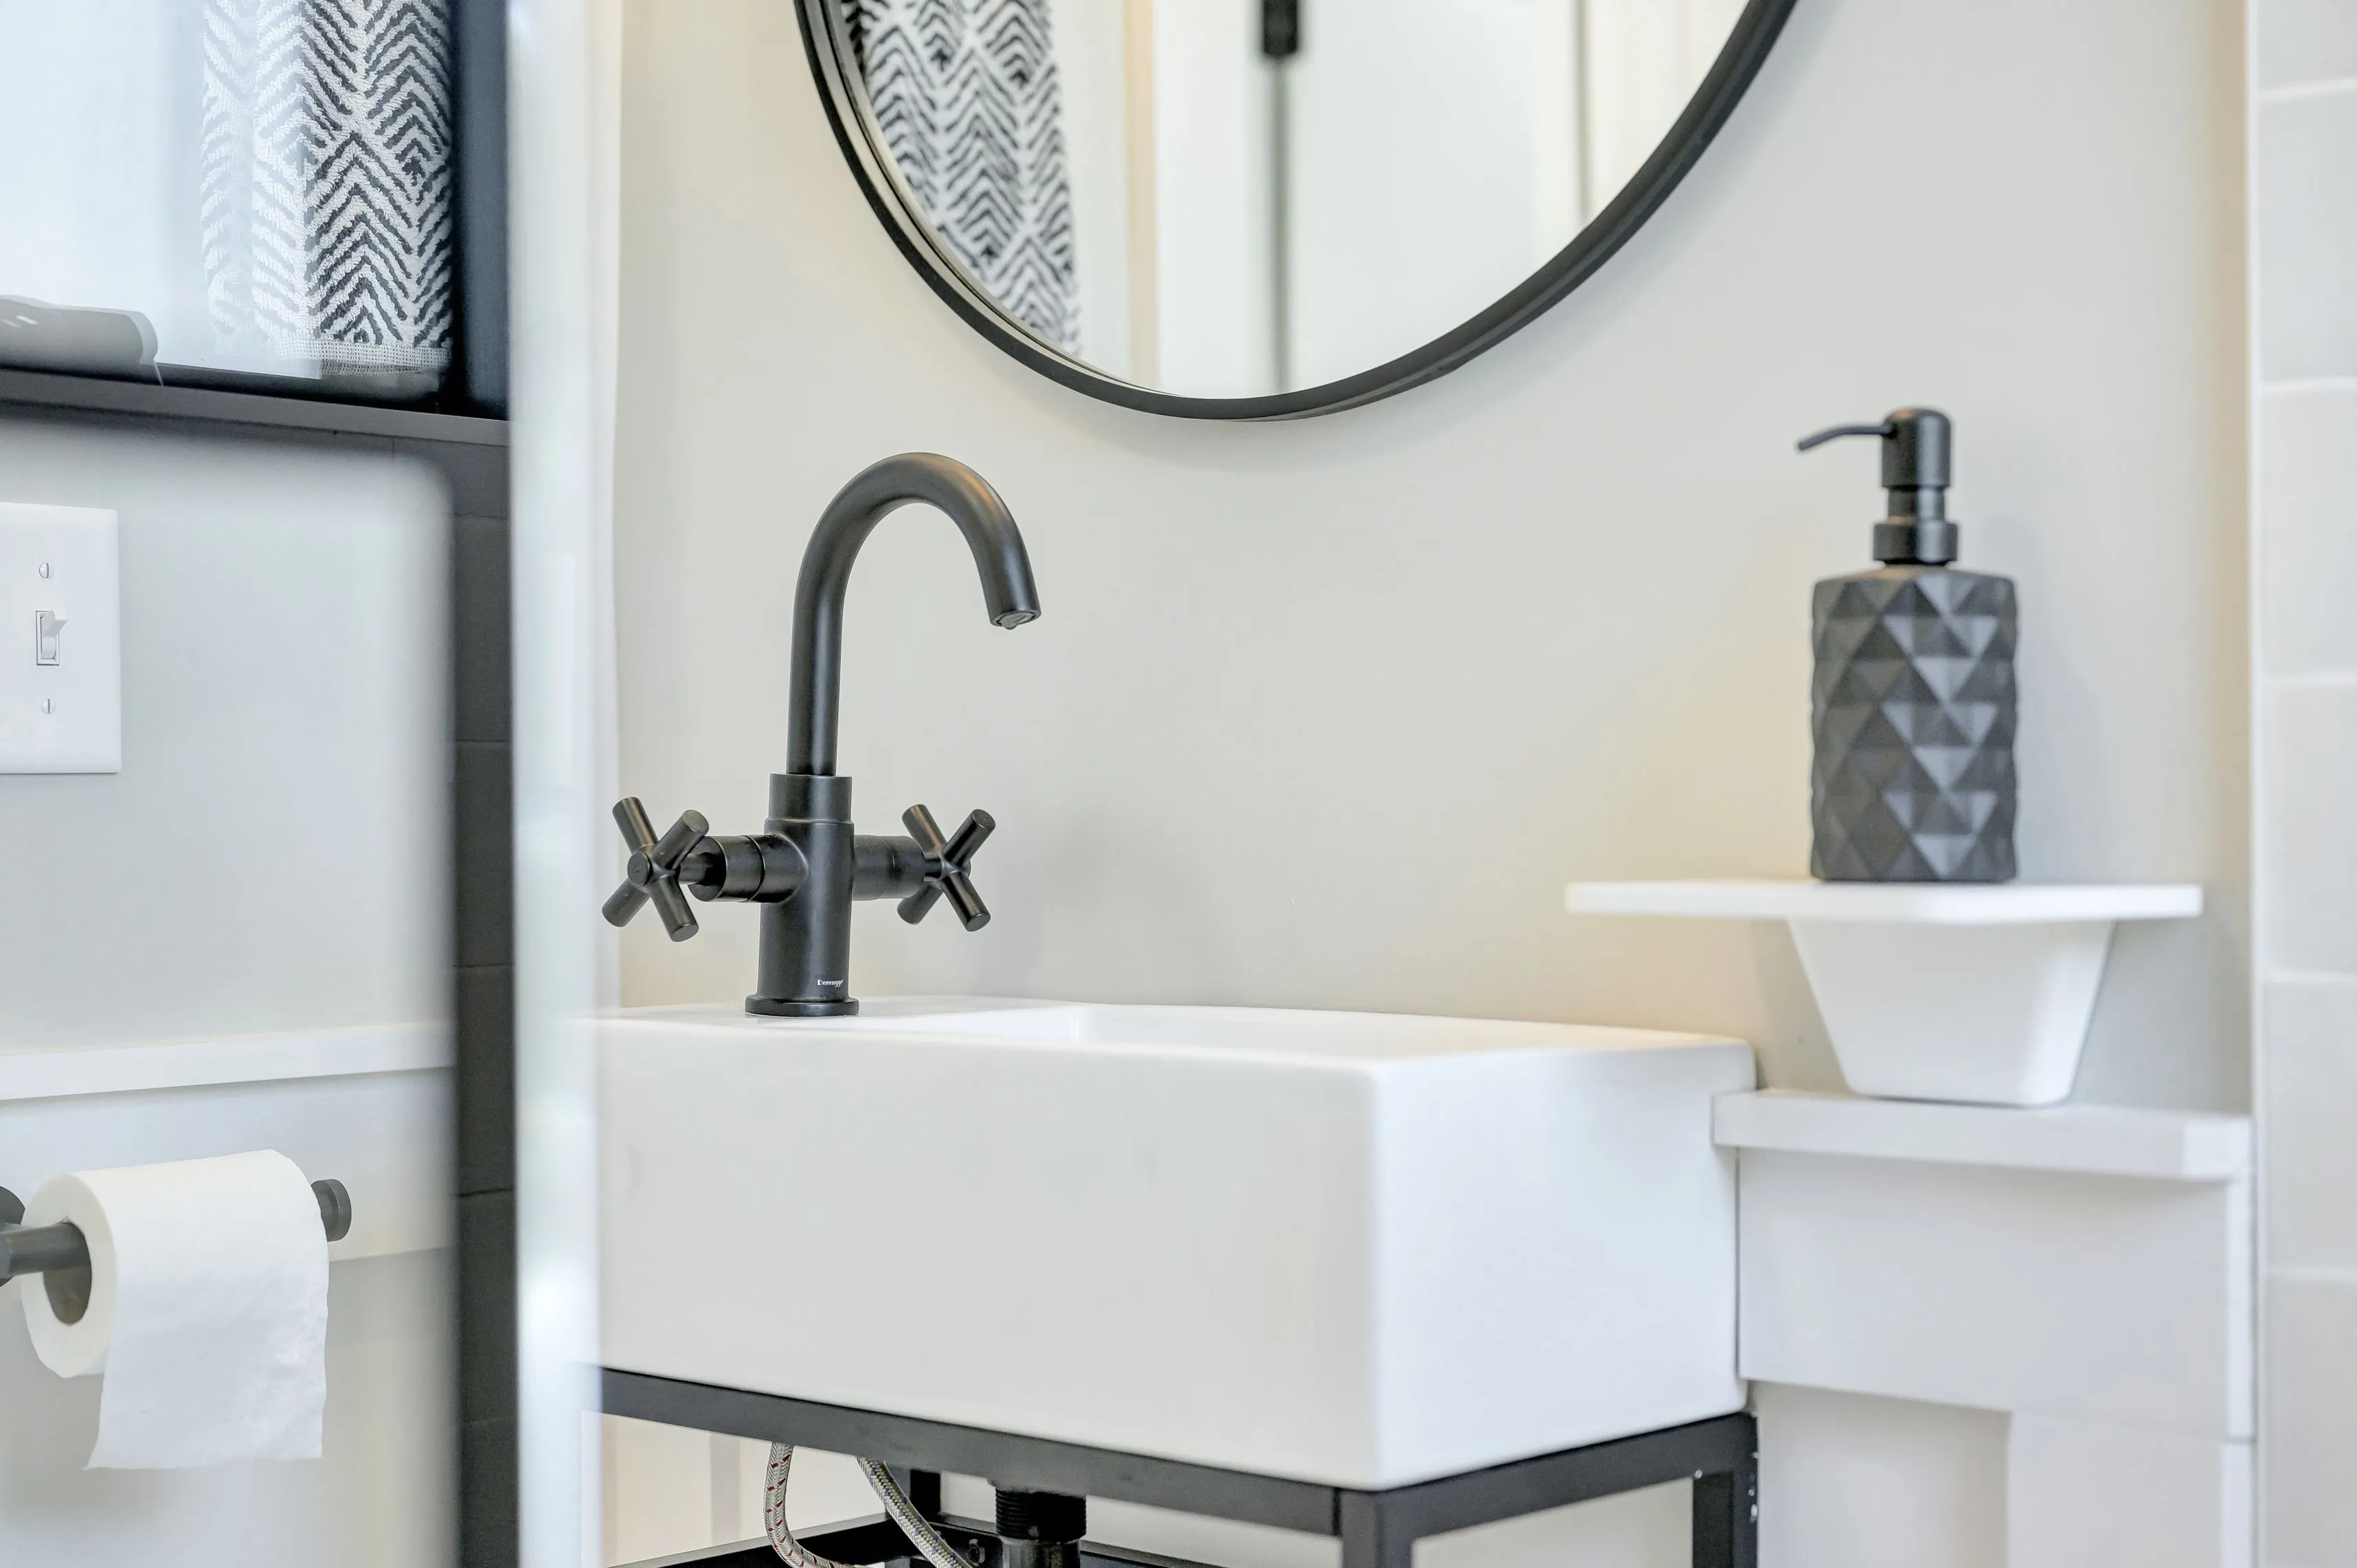 Modern bathroom interior with a white rectangular vessel sink, matte black faucet, towel, round mirror, and soap dispenser.